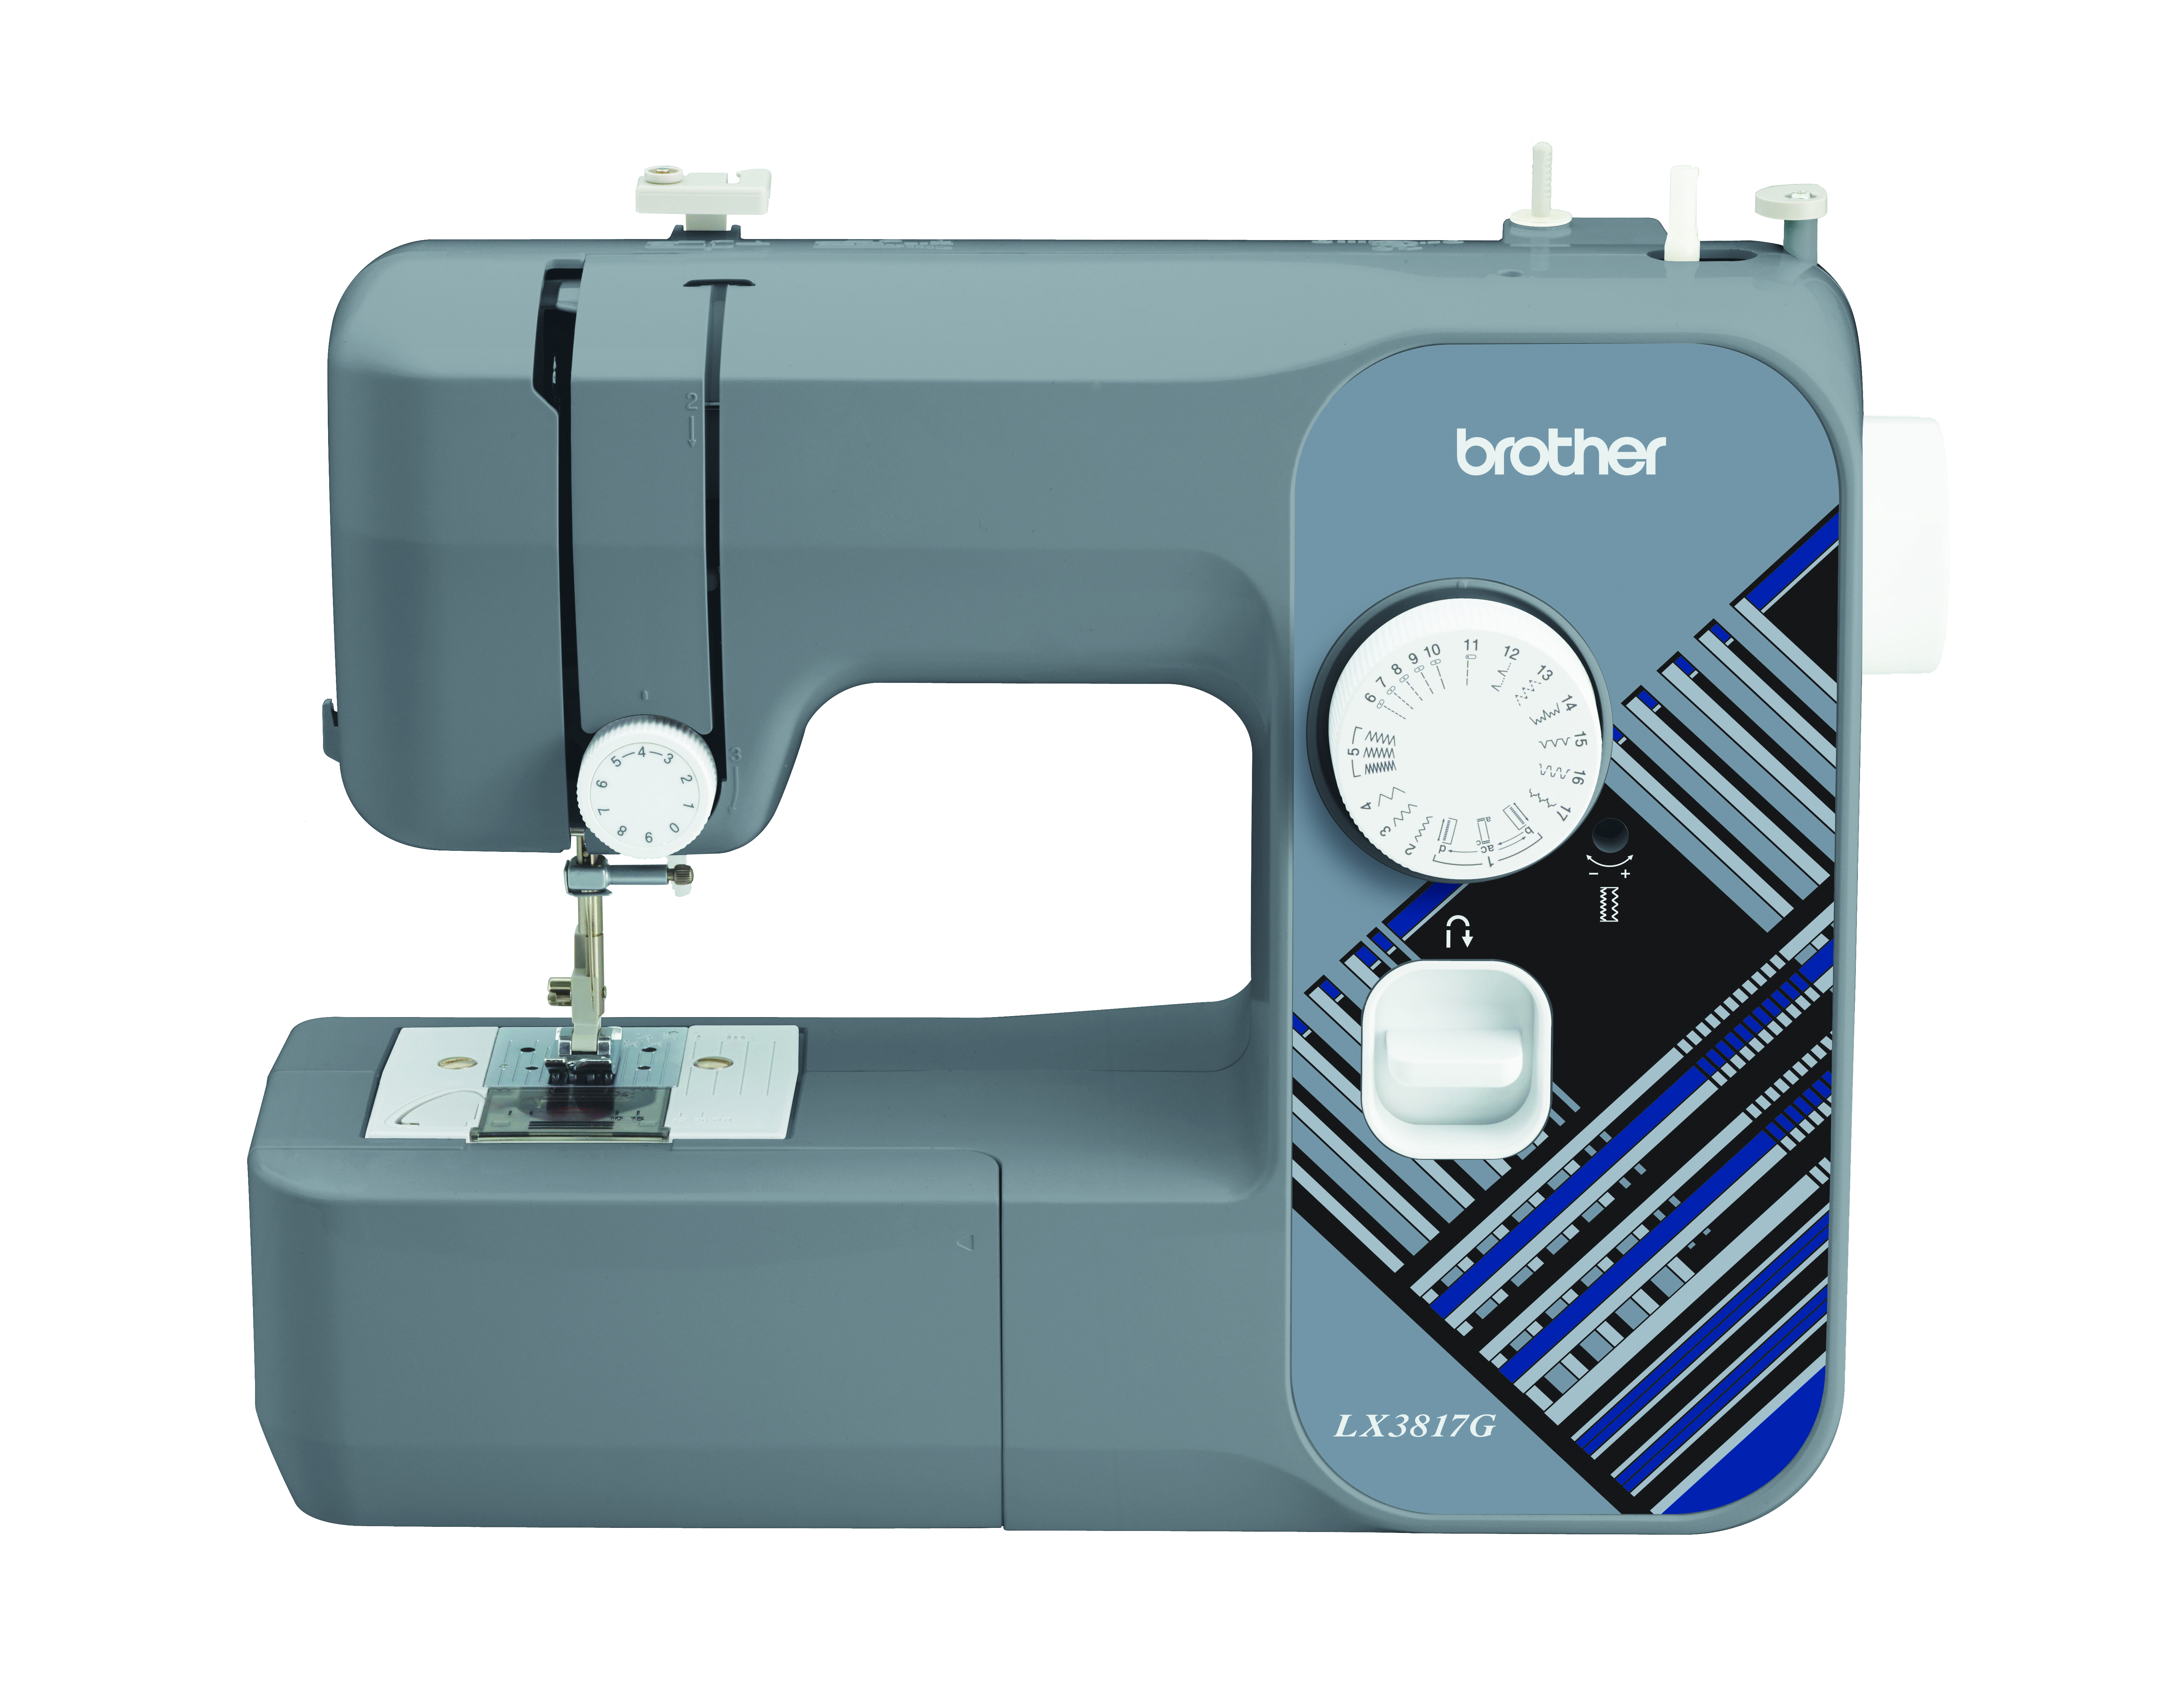  Brother Sewing Machine, XM1010, 10 Built-in Stitches, 4  Included Sewing Feet